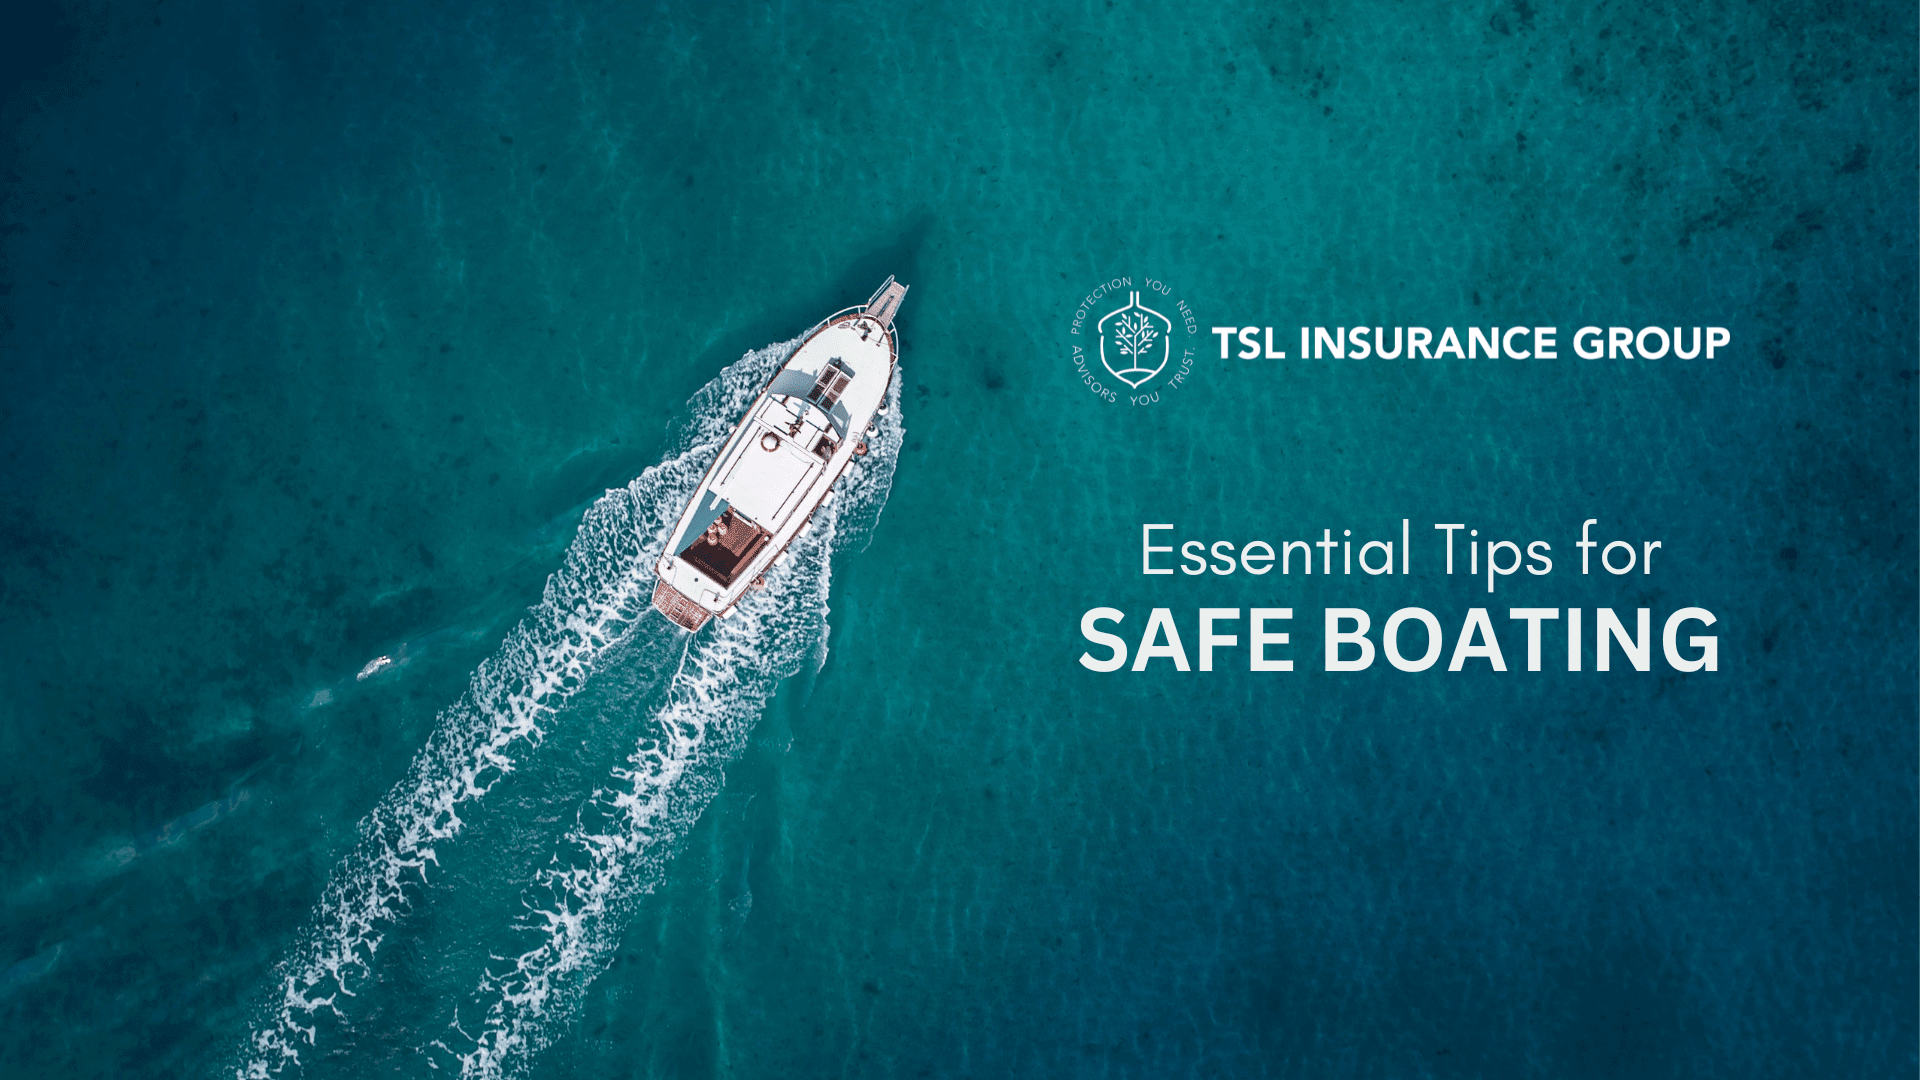 Essential Tips for Safe Boating on Louisiana Waters - TSL Insurance Group